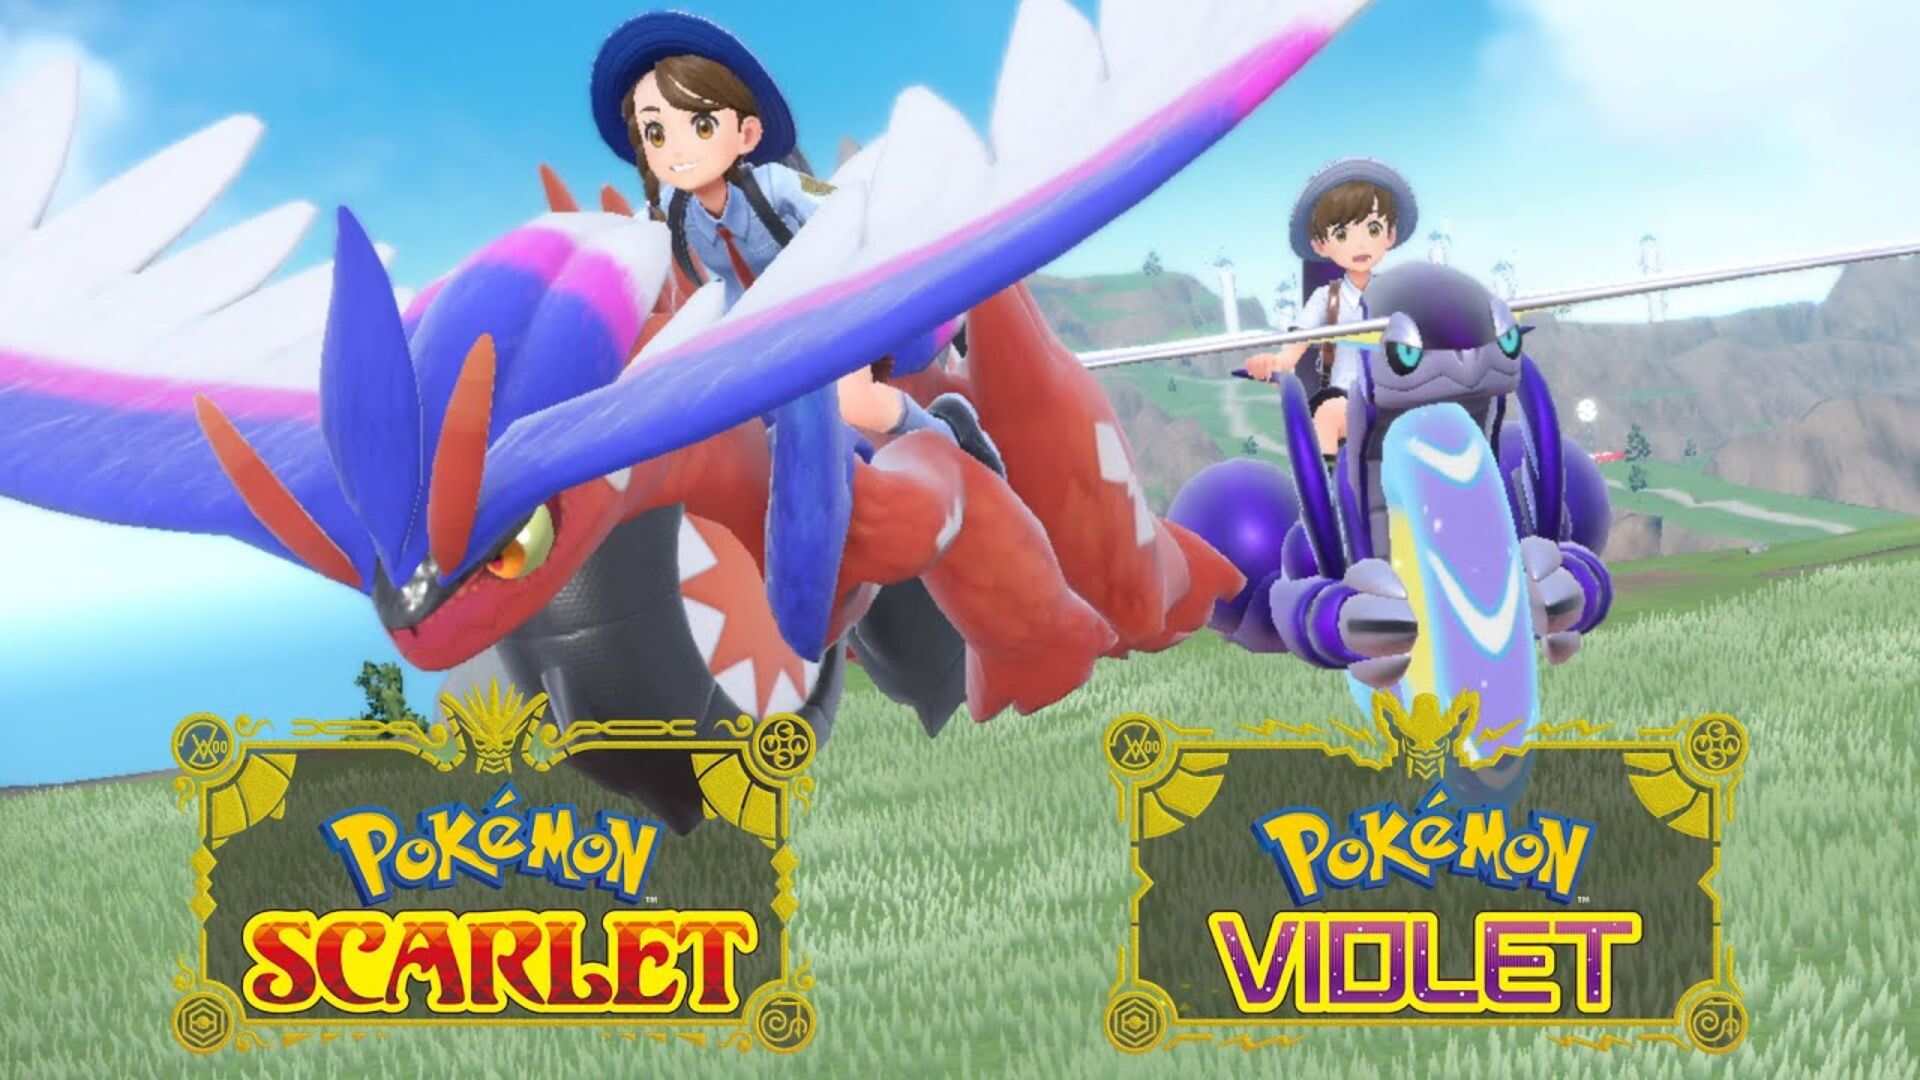 The best training regimen for Tera Raids is shared by Pokémon Scarlet and Violet players